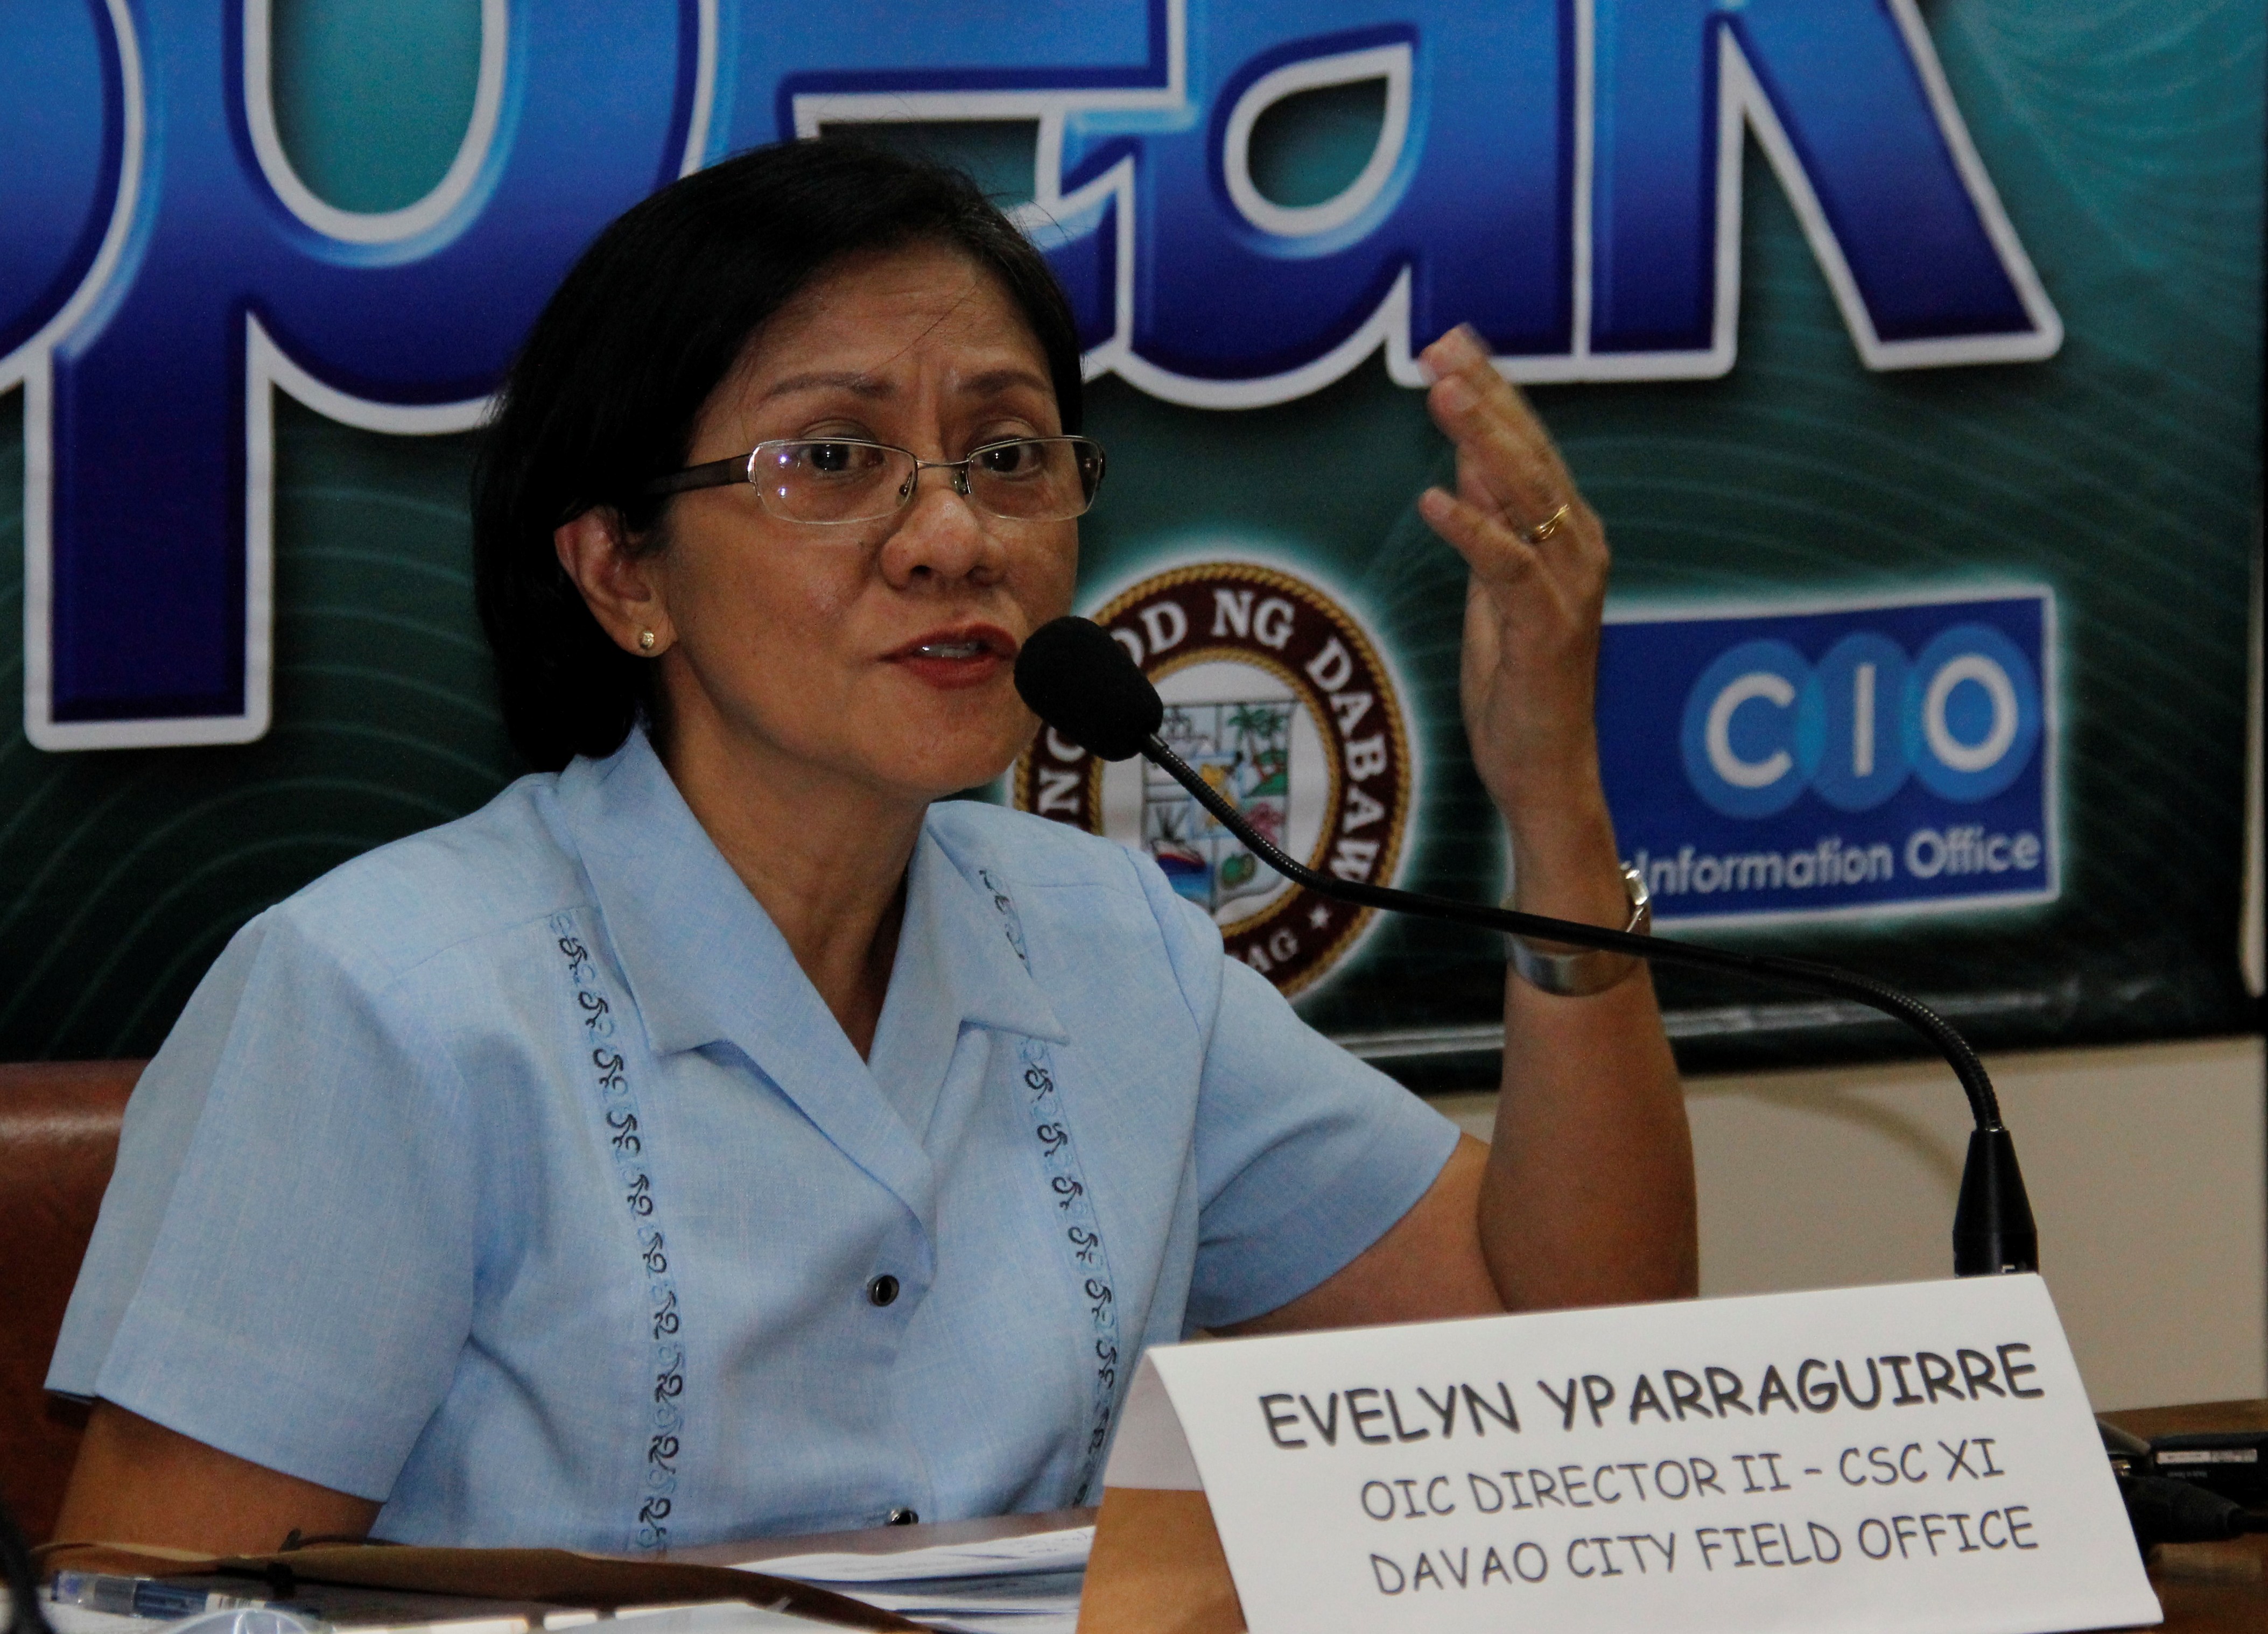 OIC Director of CSC Davao City Field Office Evelyn B. Yparraguirre announces during Thursday’s I-Speak forum the coming October 2013 Civil Service Exams is open for all those who plan to seek employment in government office. (davaotoday.com photo by Medel V. Hernani)